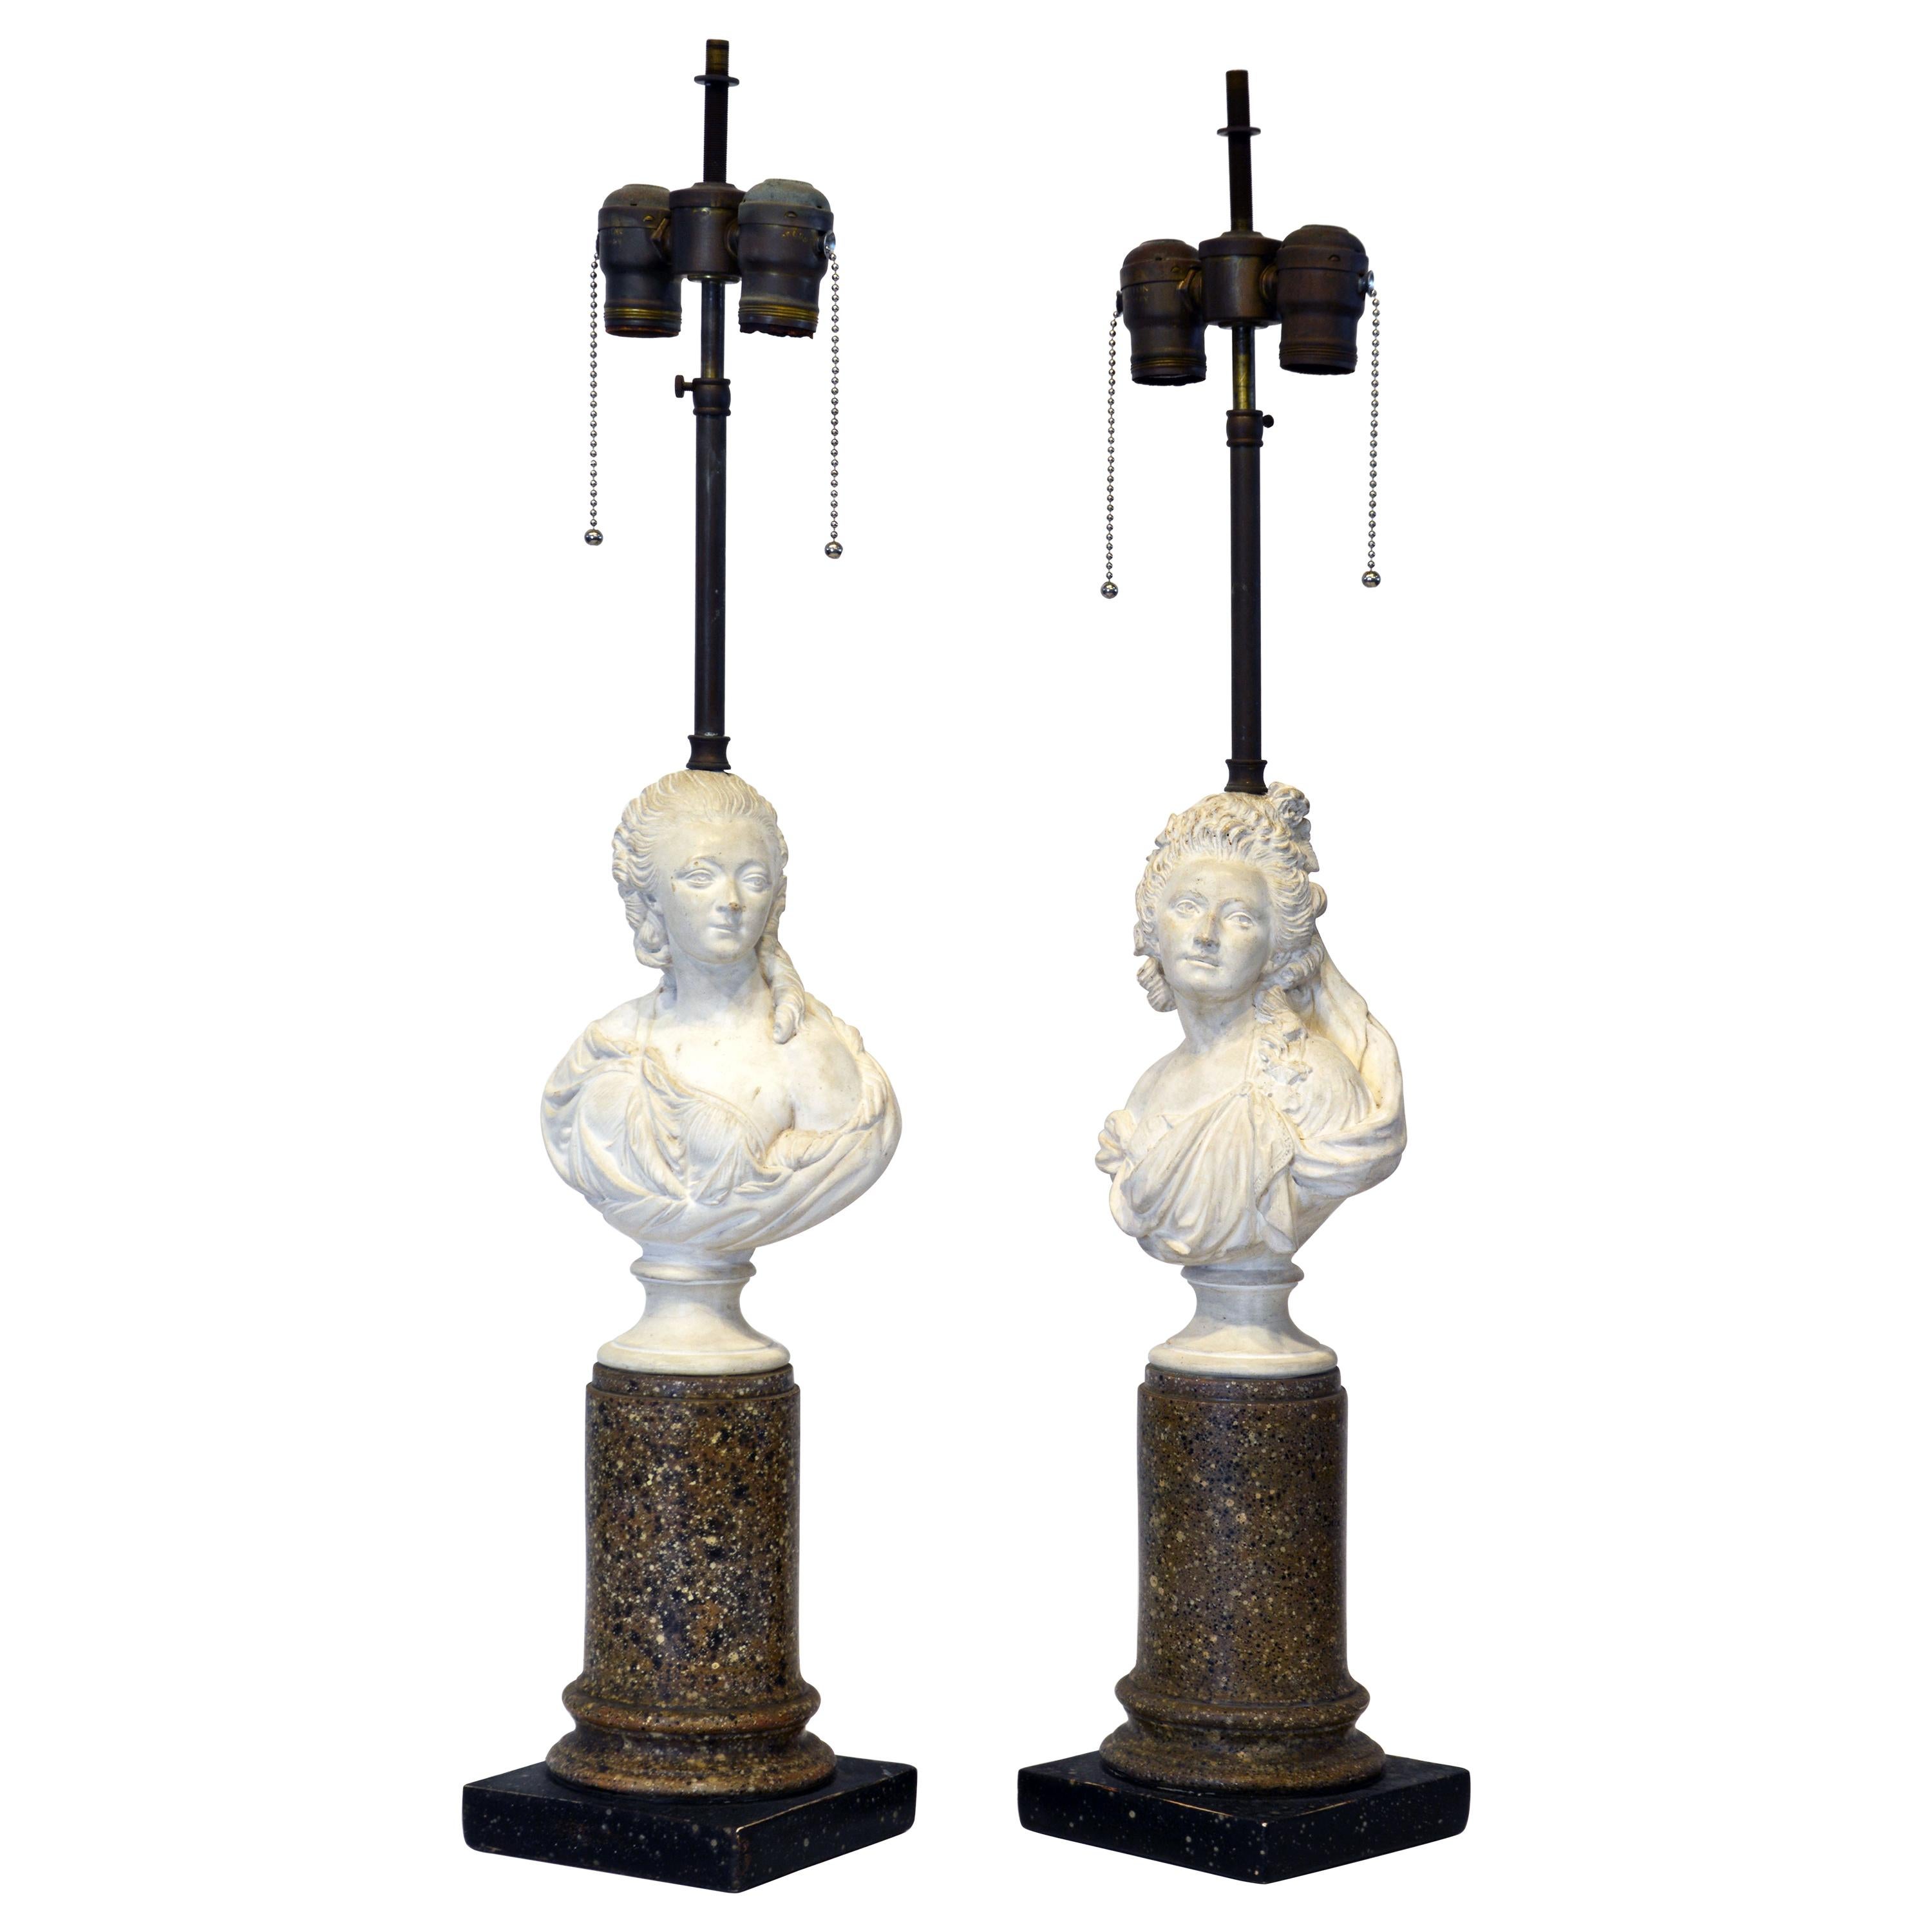 Pair of Italian Midcentury Borghese Column and Bust Table Lamps